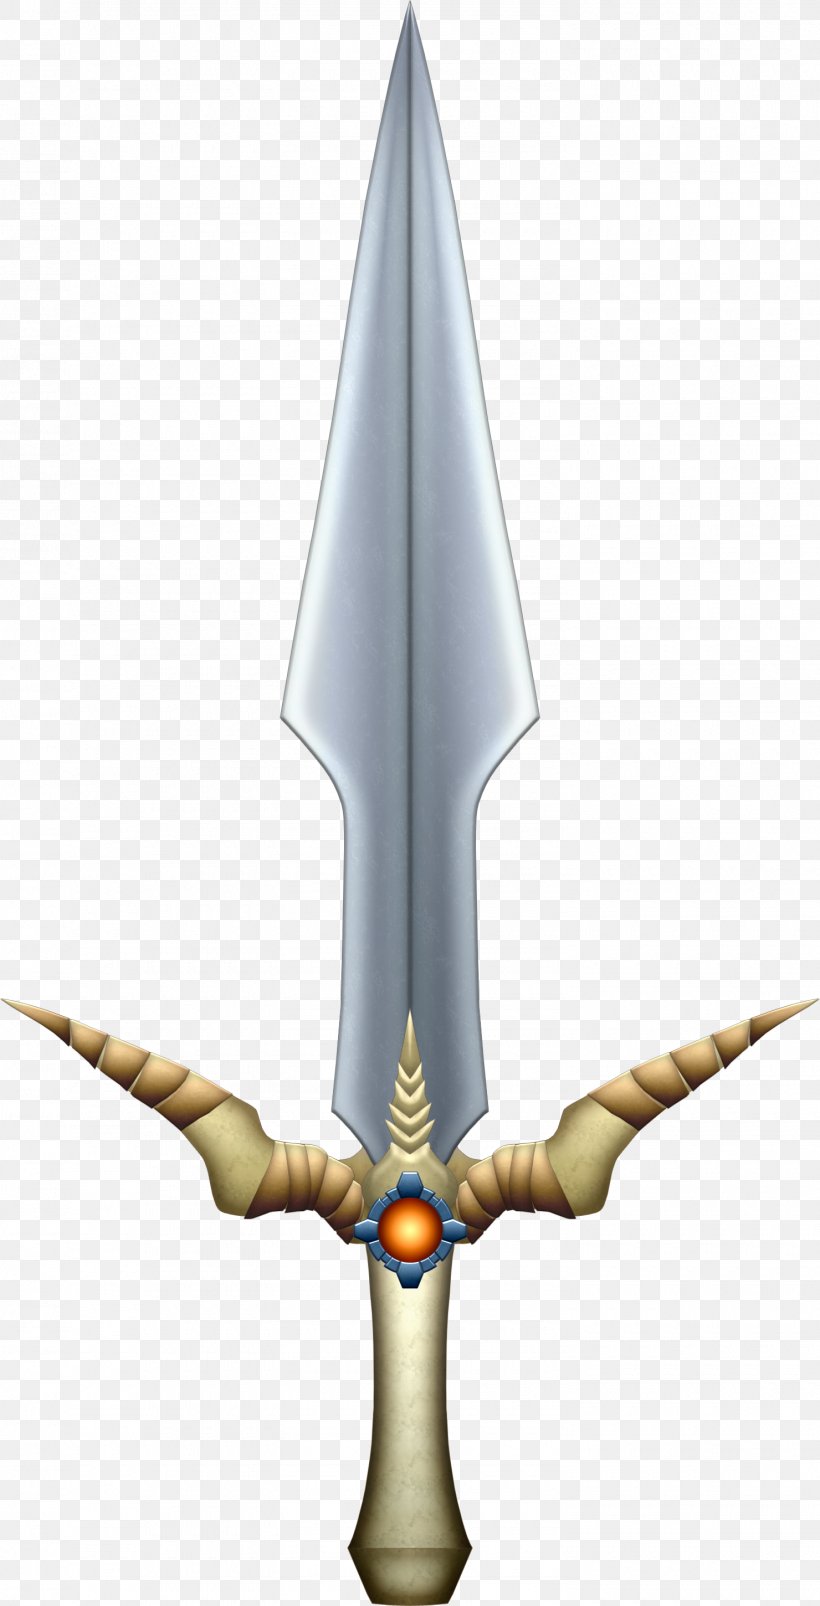 The Legend Of Zelda: Ocarina Of Time 3D The Legend Of Zelda: Twilight Princess HD The Legend Of Zelda: The Wind Waker Ganon, PNG, 1480x2899px, Legend Of Zelda Ocarina Of Time, Cold Weapon, Ganon, Legend Of Zelda, Legend Of Zelda Ocarina Of Time 3d Download Free